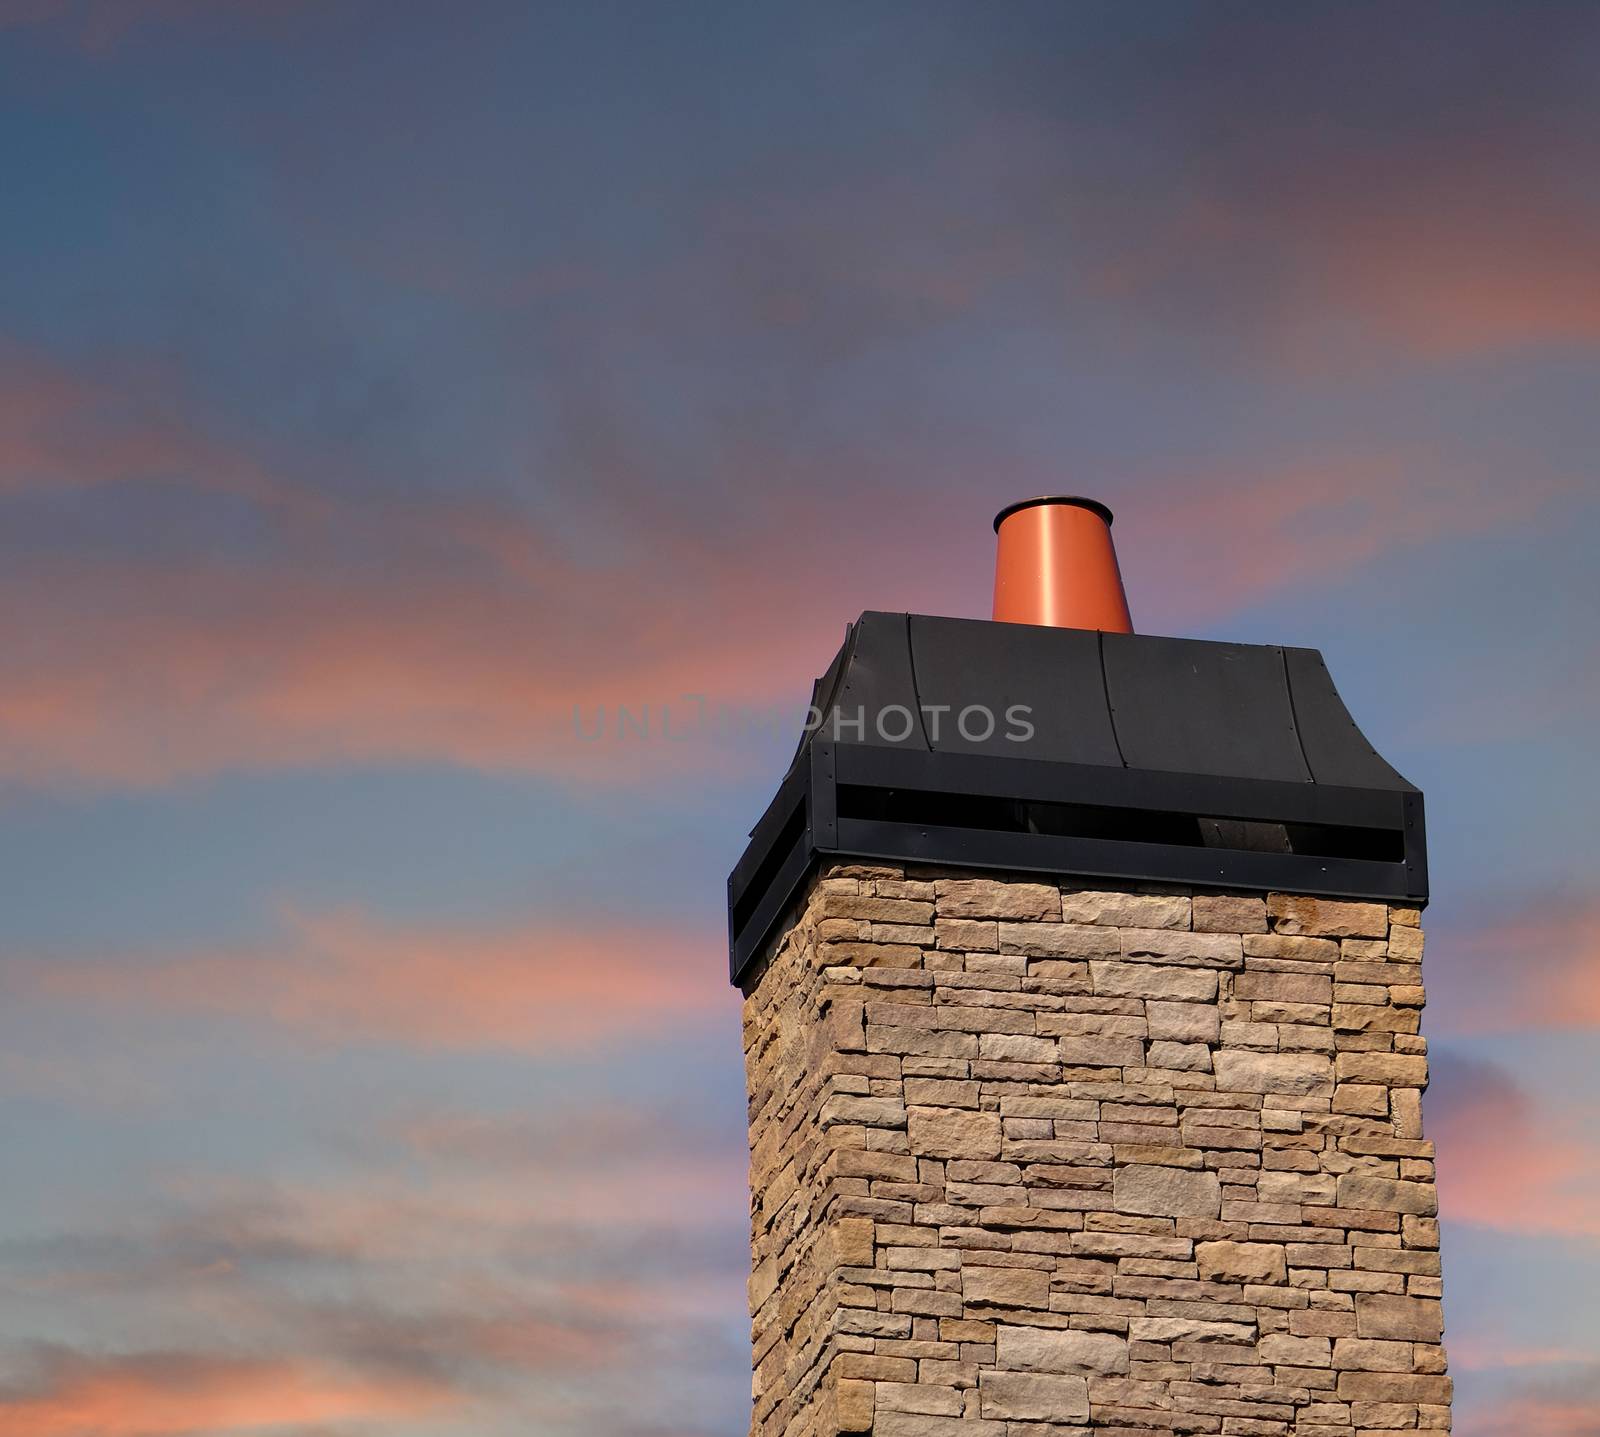 Stone Chimeny with Metal Cap at Dusk by dbvirago